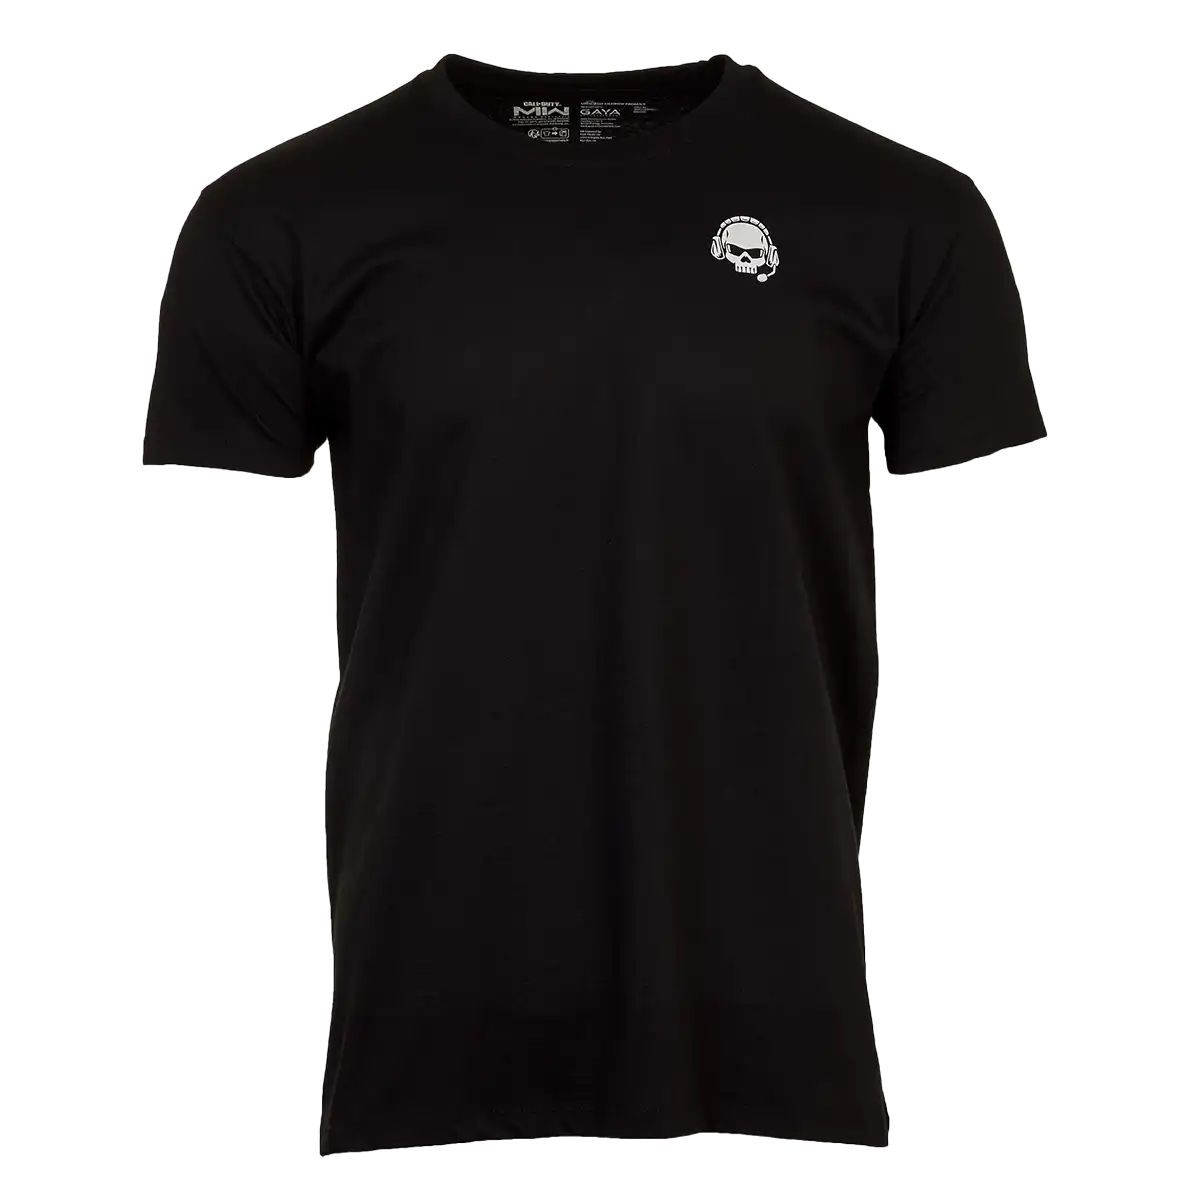 Call of Duty T-Shirt "Ghost" Black M Cover